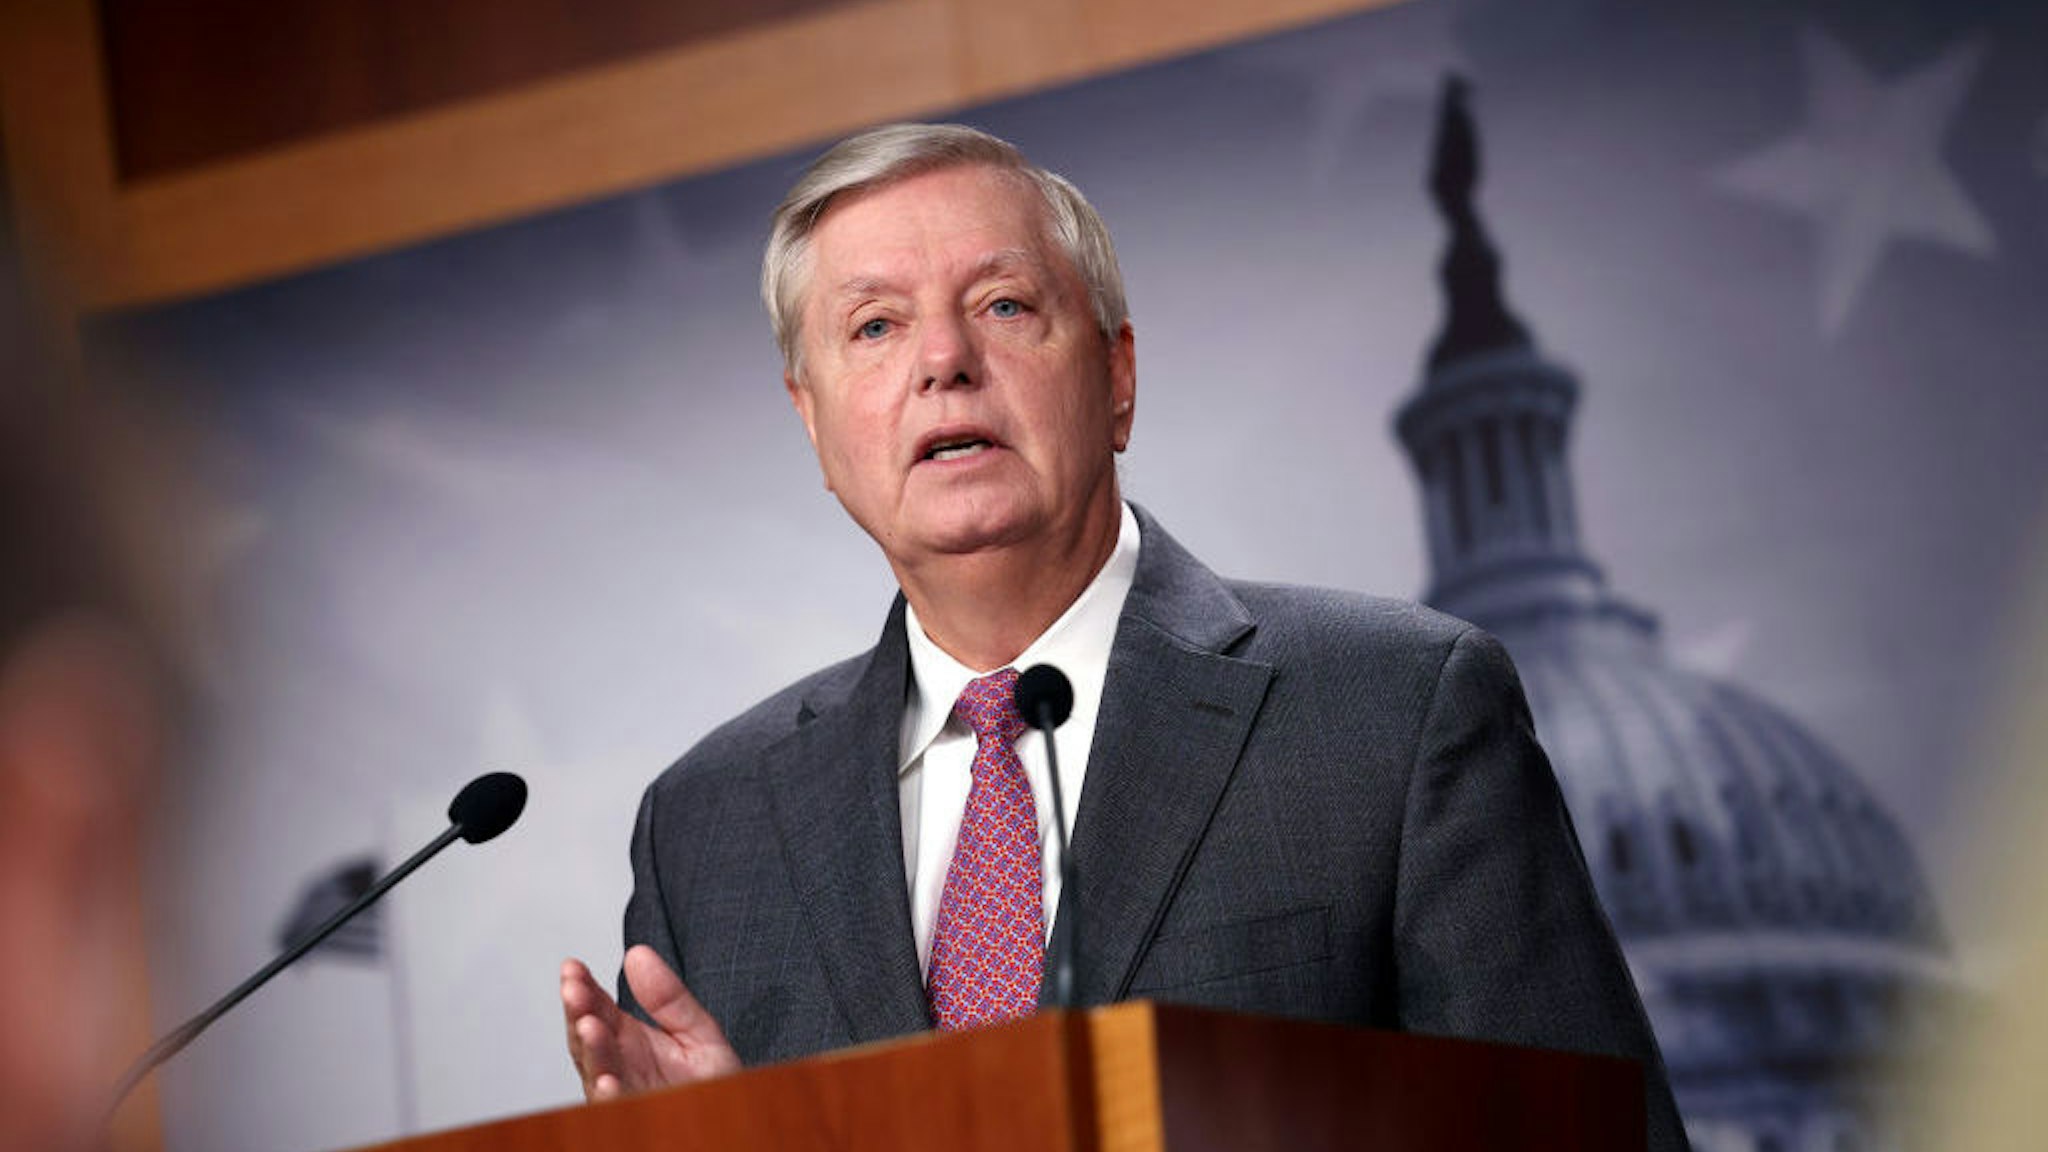 WASHINGTON, DC - JULY 30: U.S. Sen. Lindsey Graham (R-SC) speaks on southern border security and illegal immigration, during a news conference at the U.S. Capitol on July 30, 2021 in Washington, DC. Graham urged the Biden administration to name former Homeland Security Secretary Jeh Johnson as a border czar. (Photo by Kevin Dietsch/Getty Images)